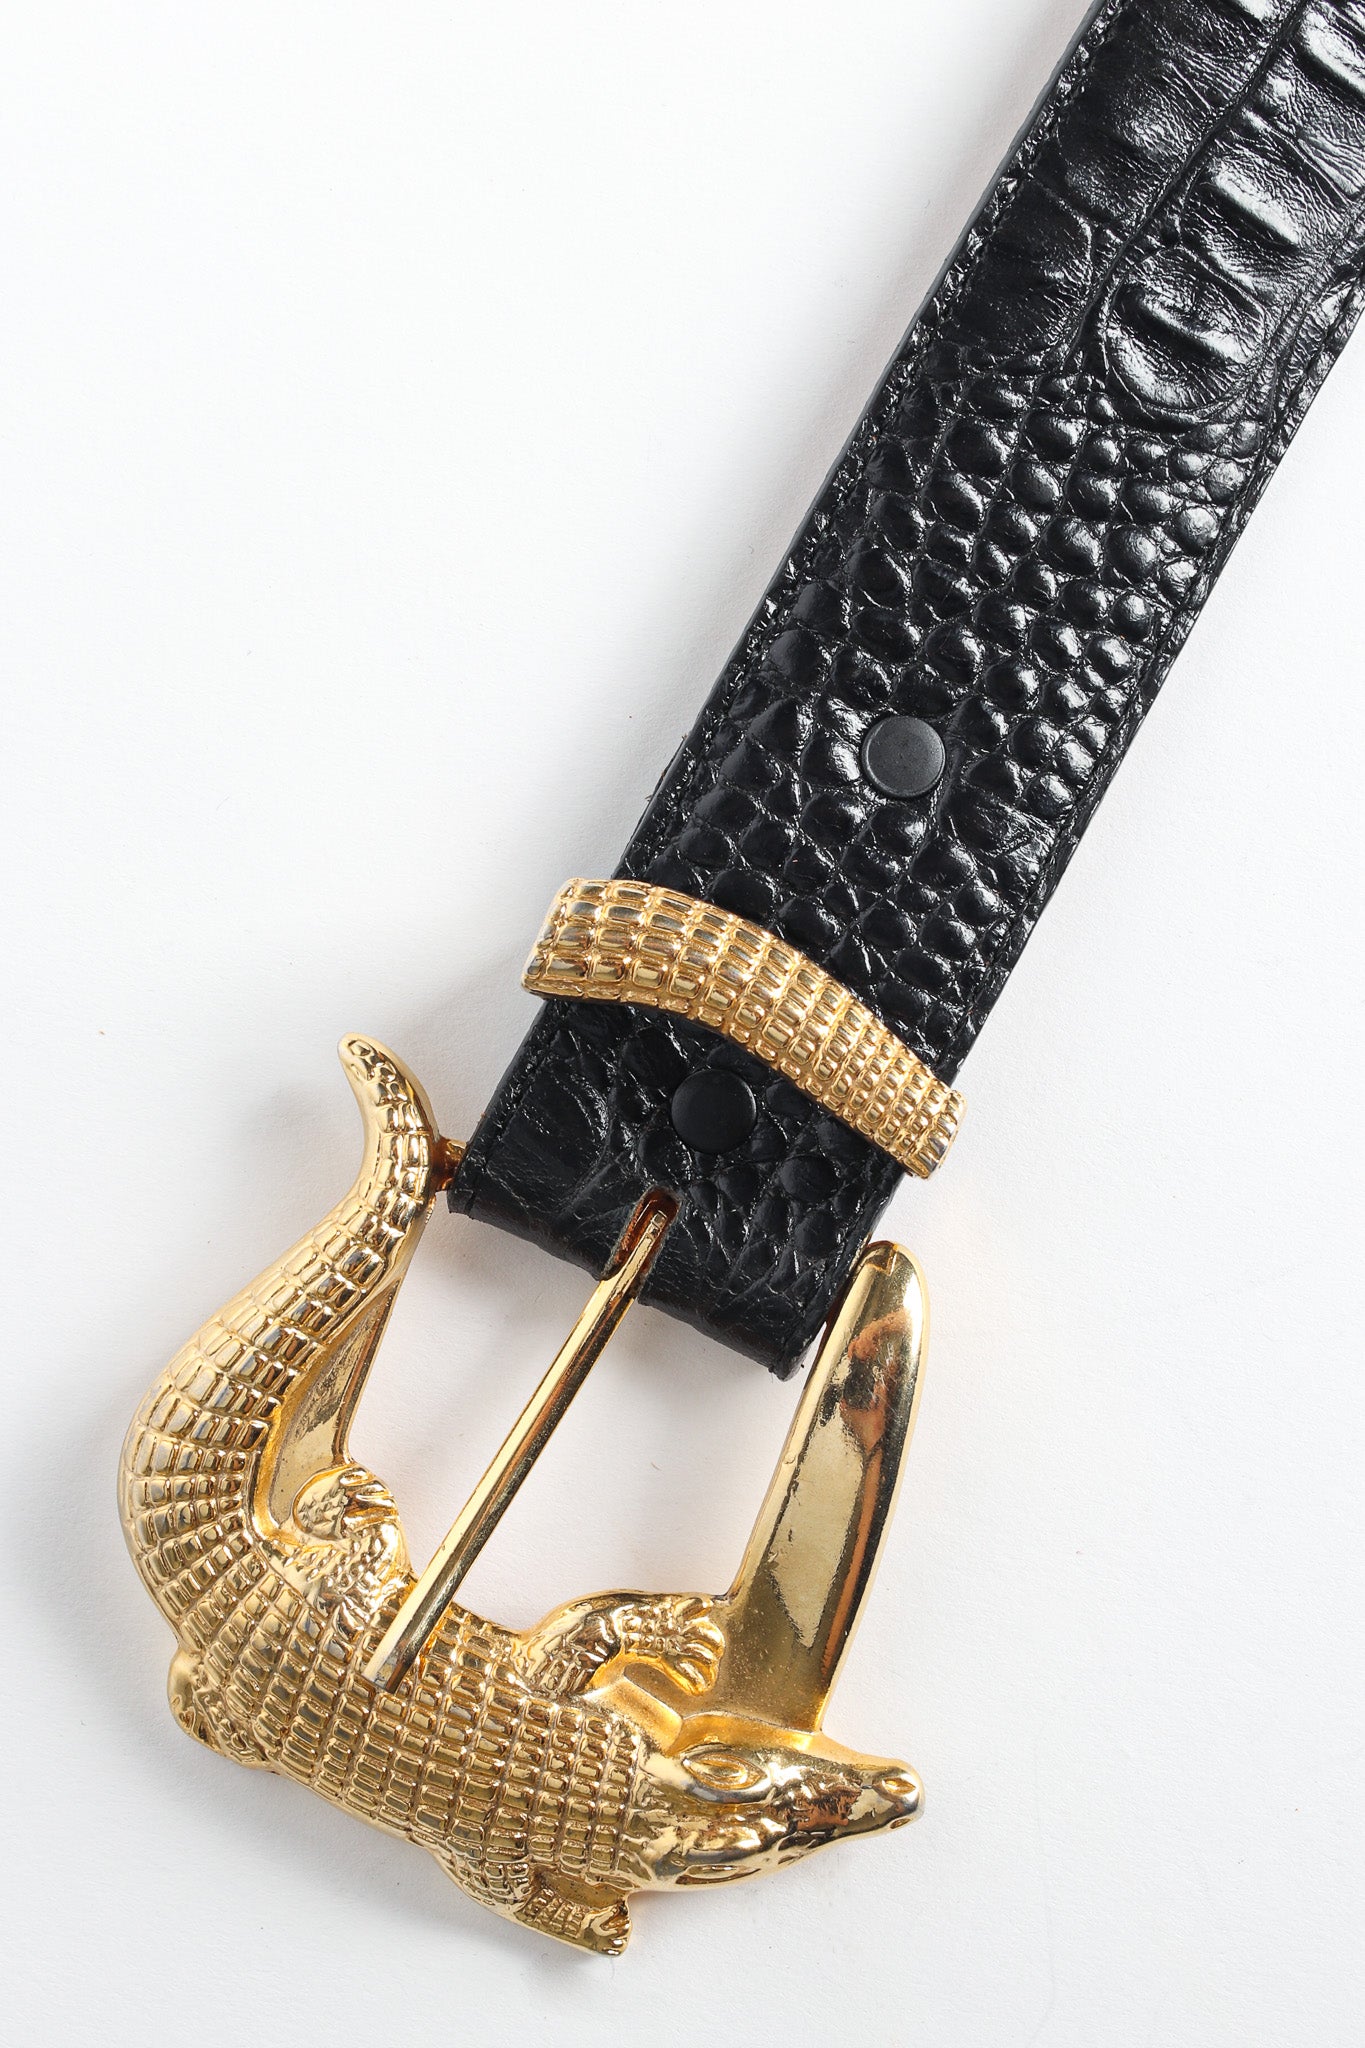 Black reptile leather belt with large alligator buckle by Justin buckle close up @recessla